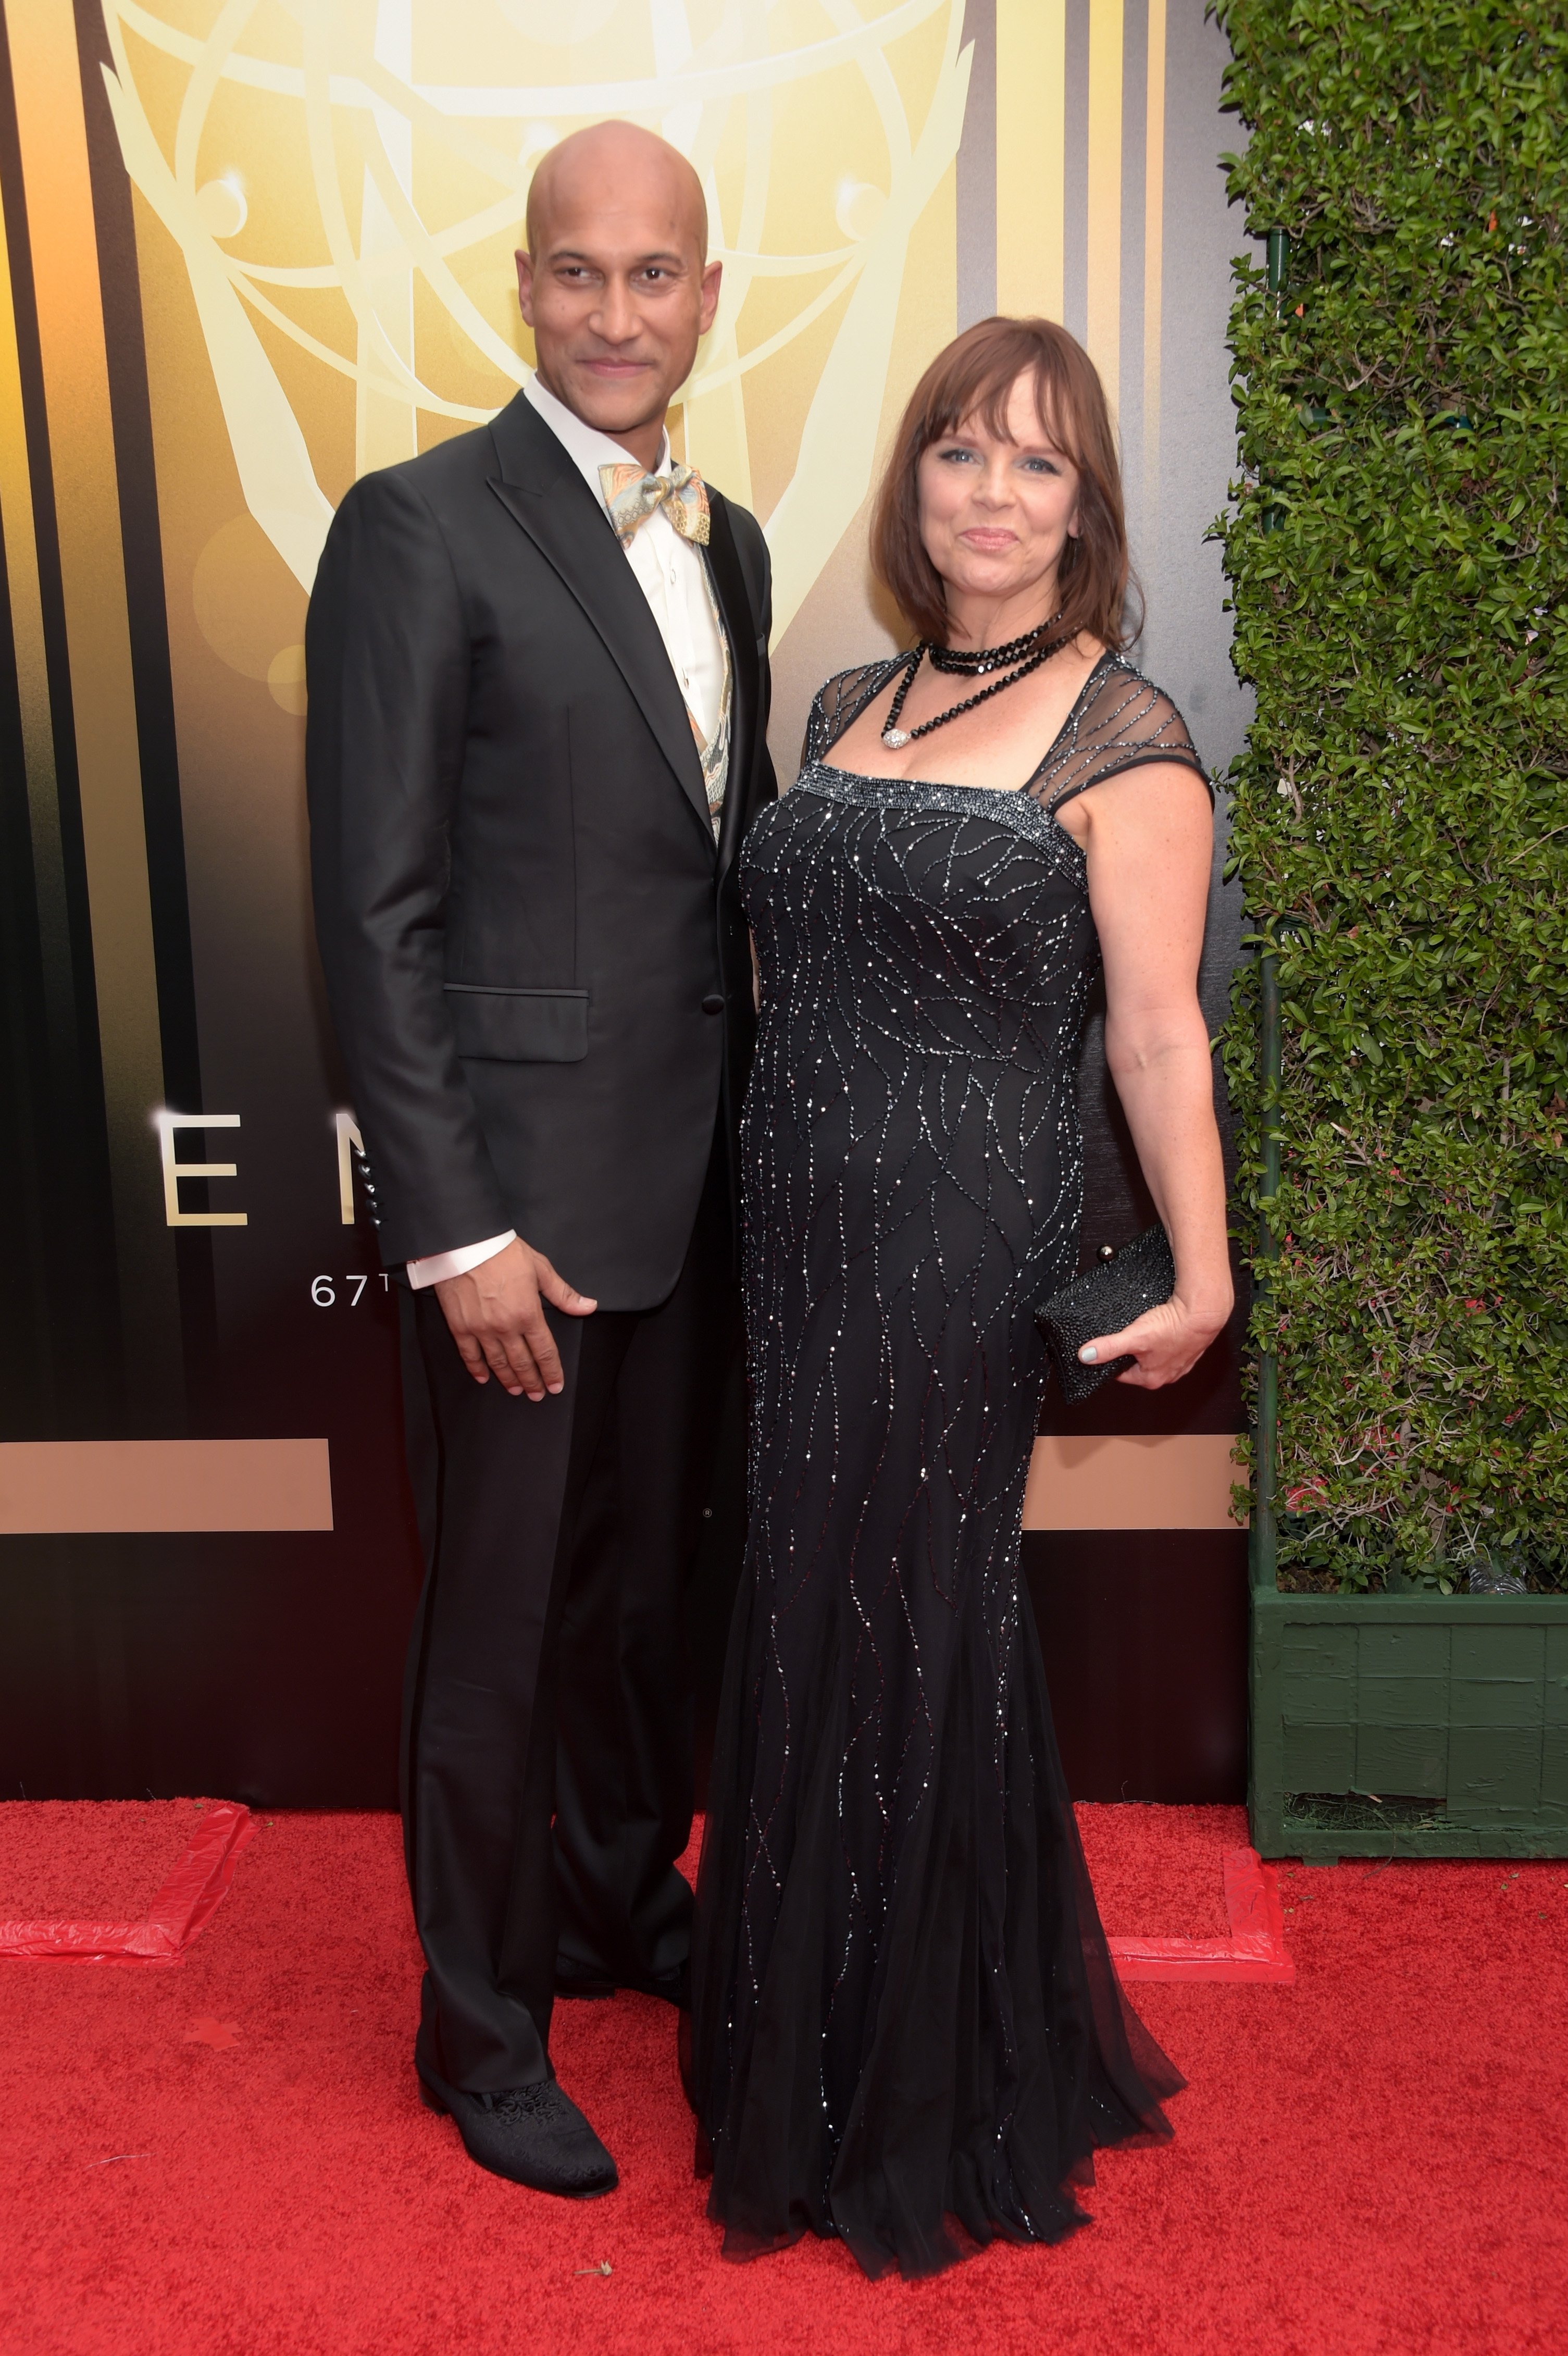 Cynthia Blaise and Keegan-Michael Key at the 2015 Creative Arts Emmy Awards in California on September 12, 2015, in California | Source: Getty Images 